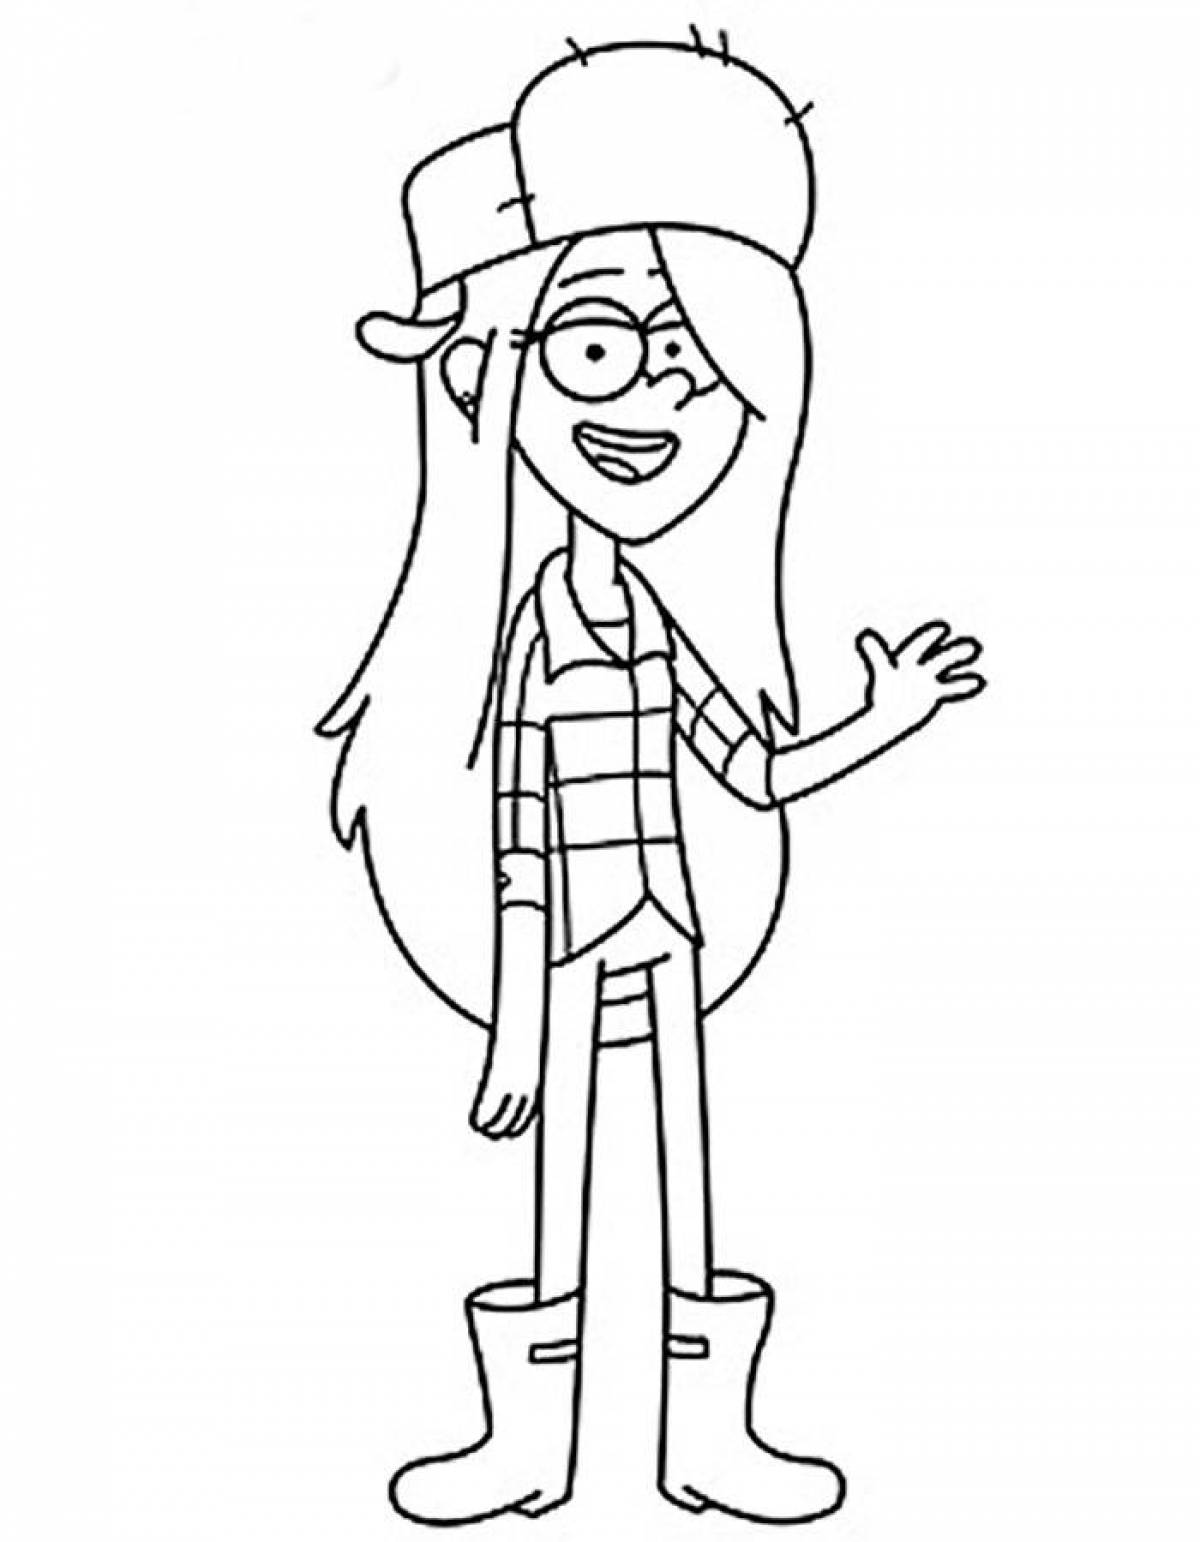 Crunchy gravity falls coloring page